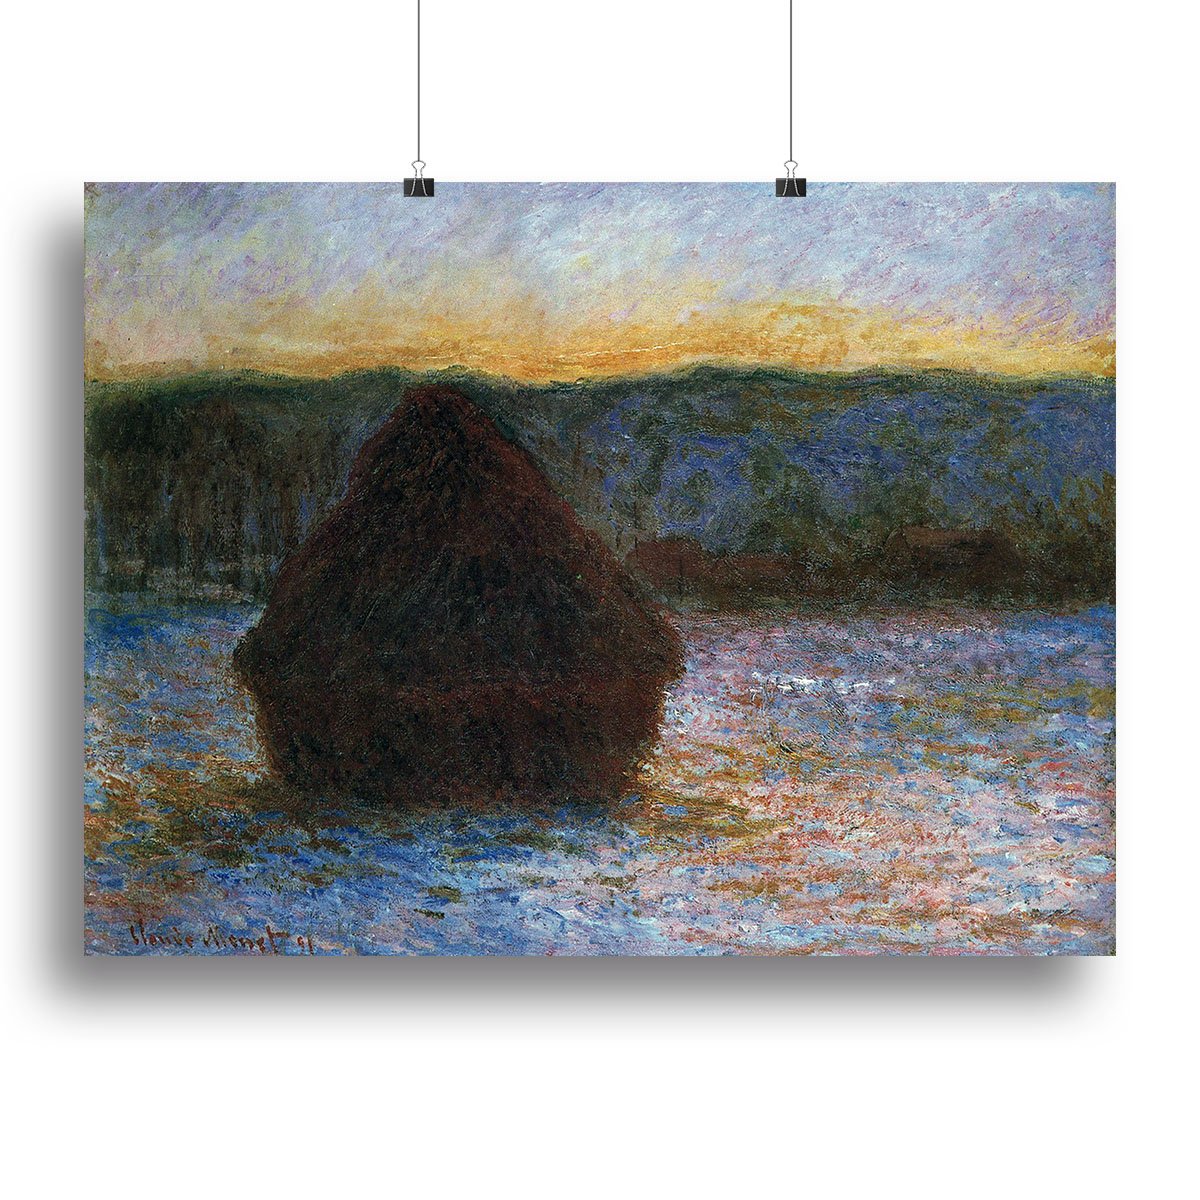 Haylofts thaw sunset by Monet Canvas Print or Poster